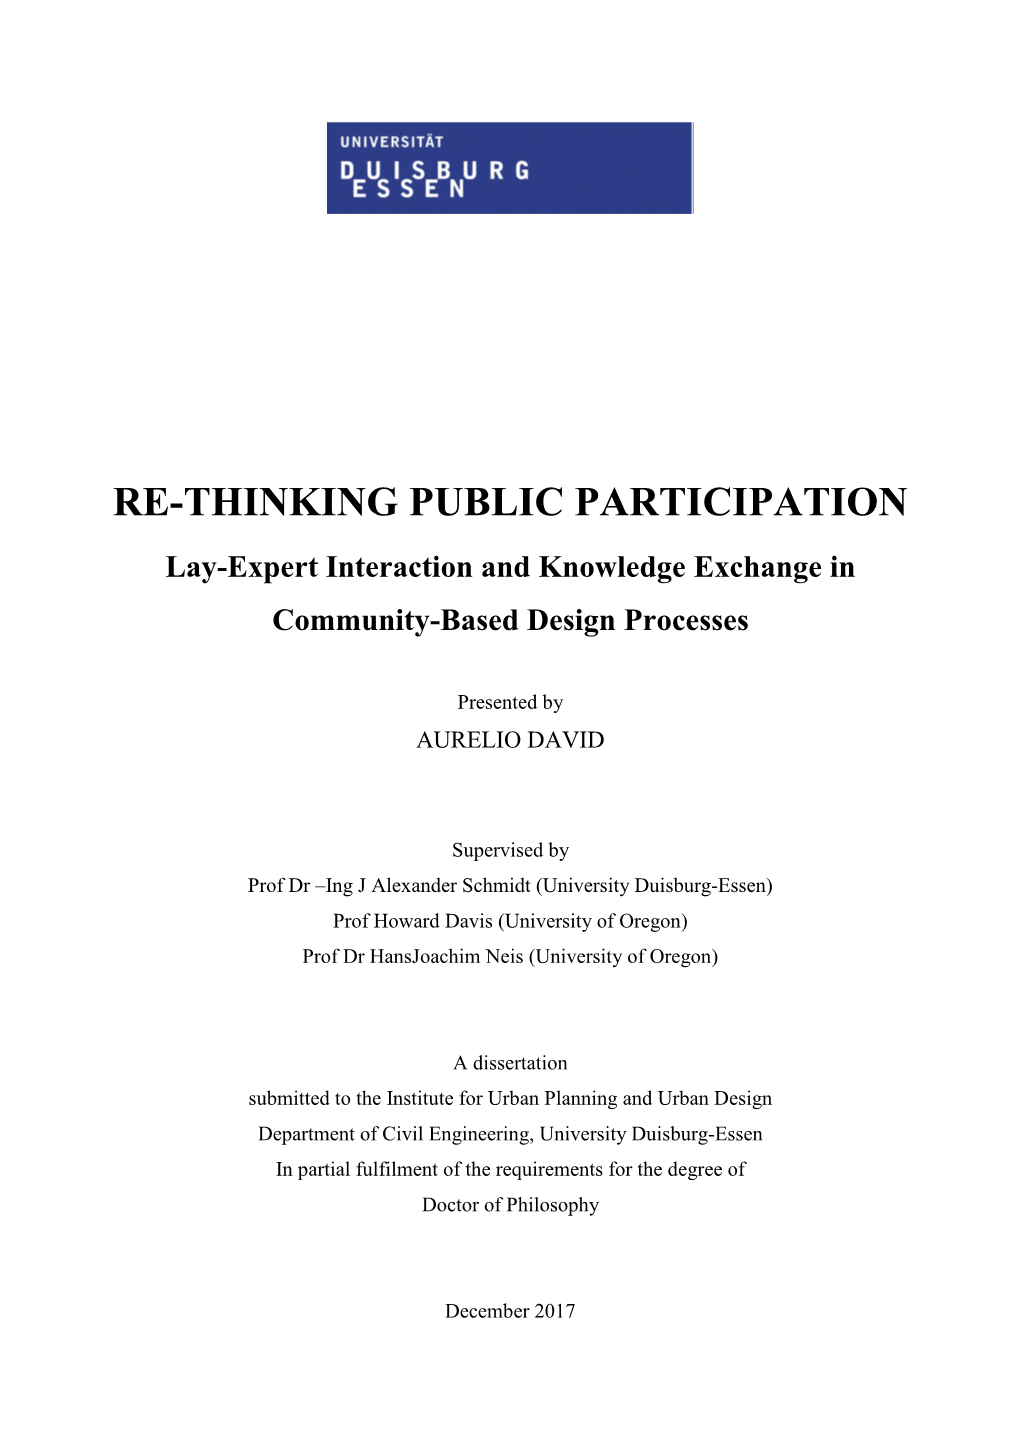 RE-THINKING PUBLIC PARTICIPATION Lay-Expert Interaction and Knowledge Exchange in Community-Based Design Processes